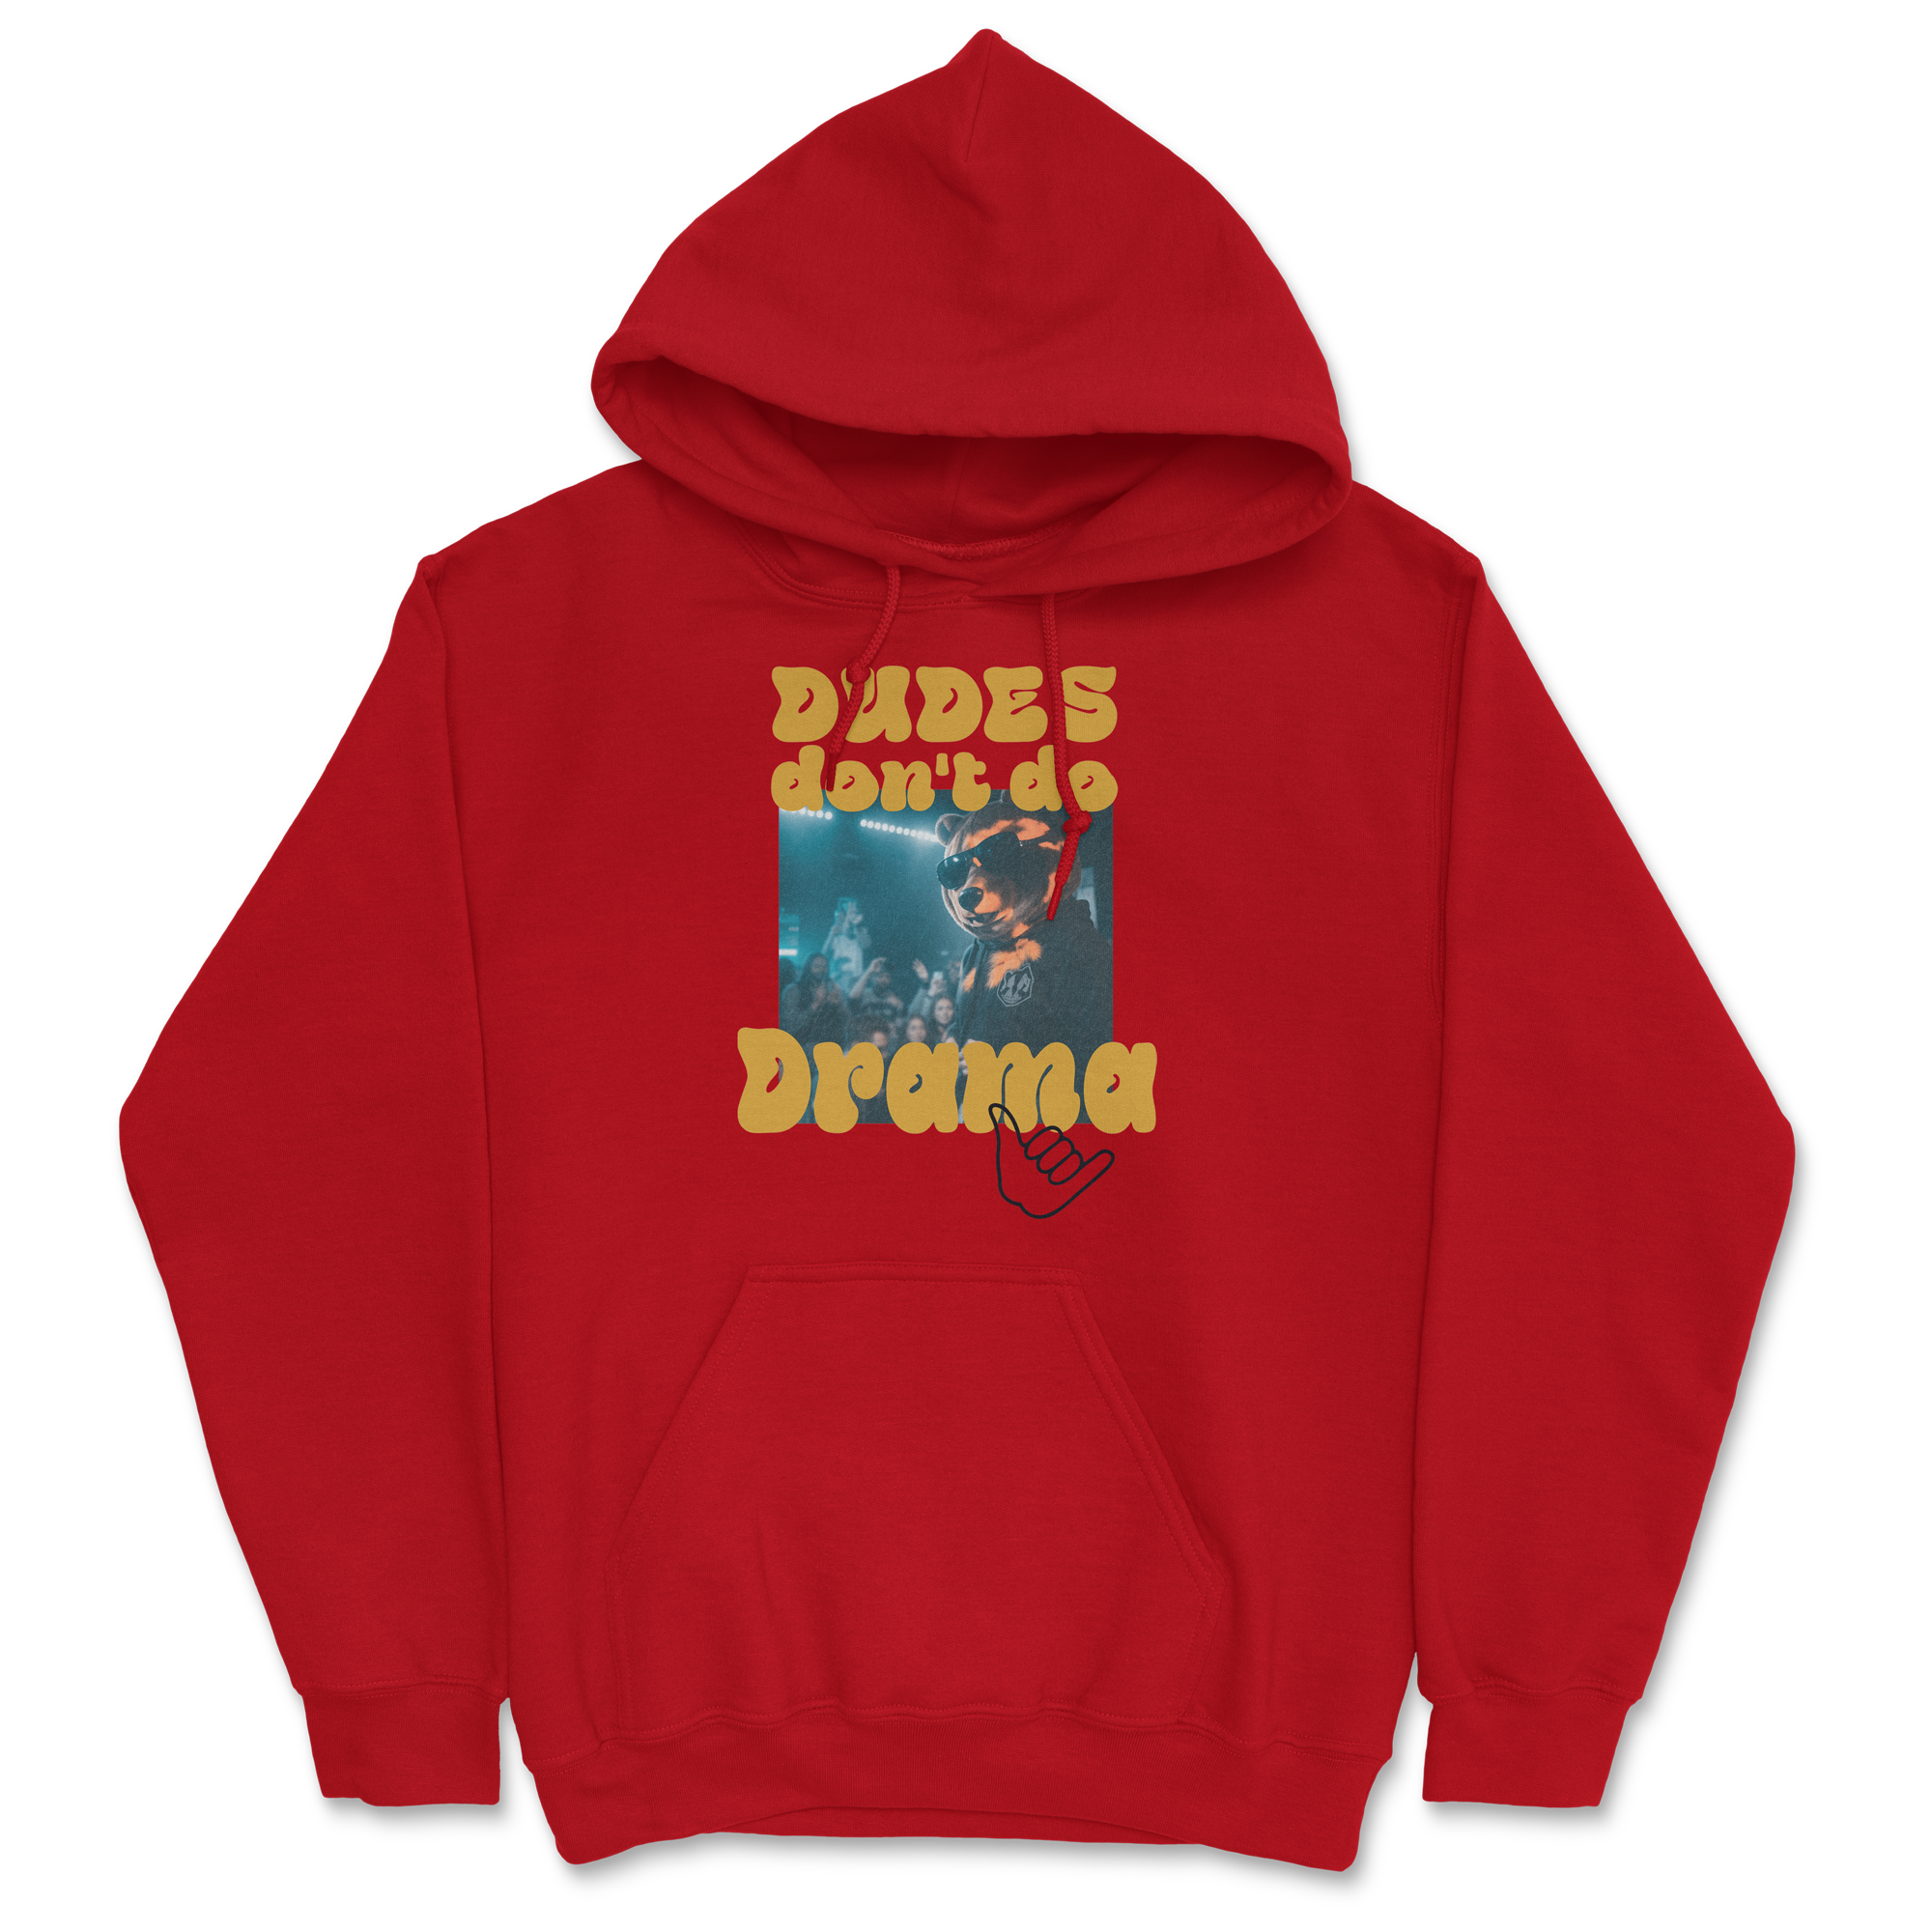 Don't Do Drama Hoodie - Red